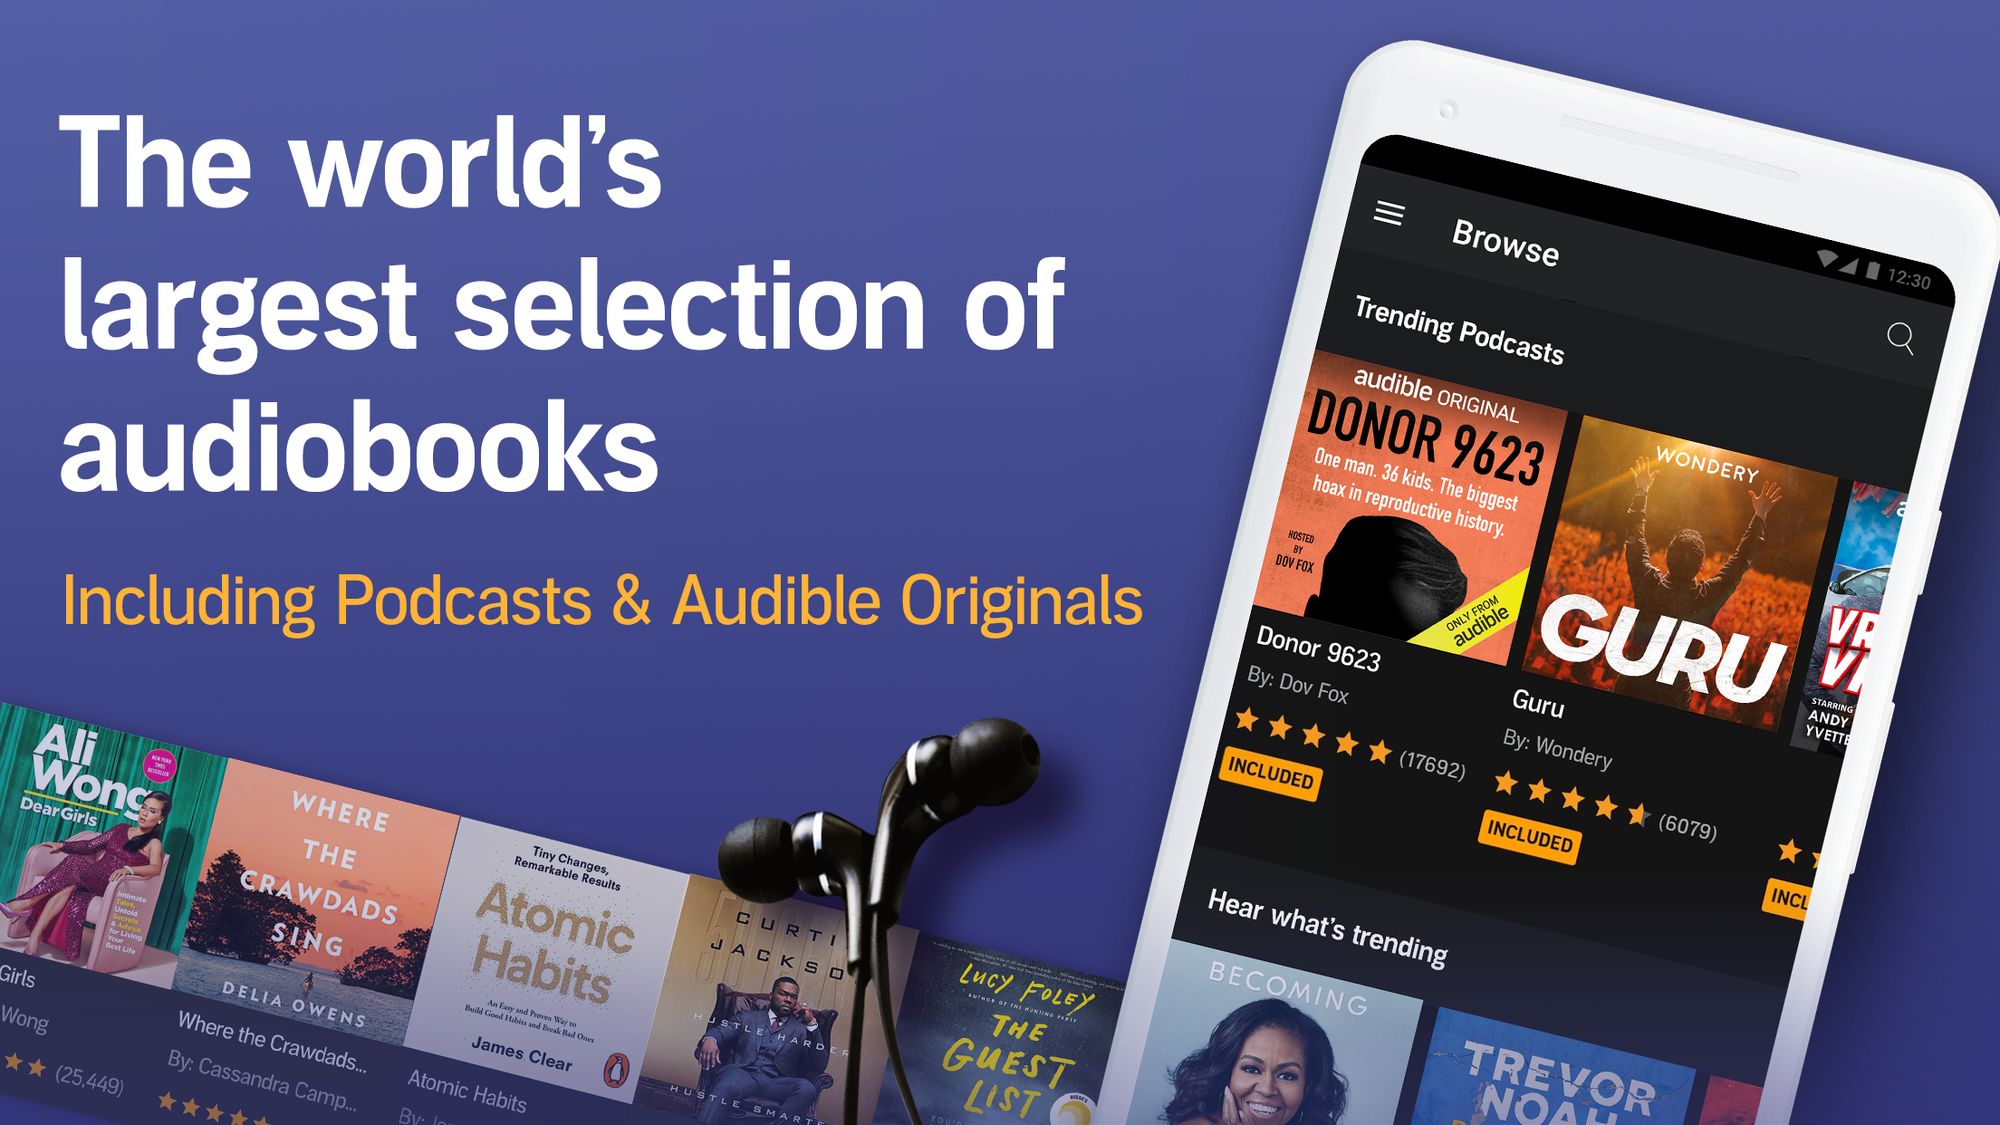 Audible has the world's largest selection of audiobooks.